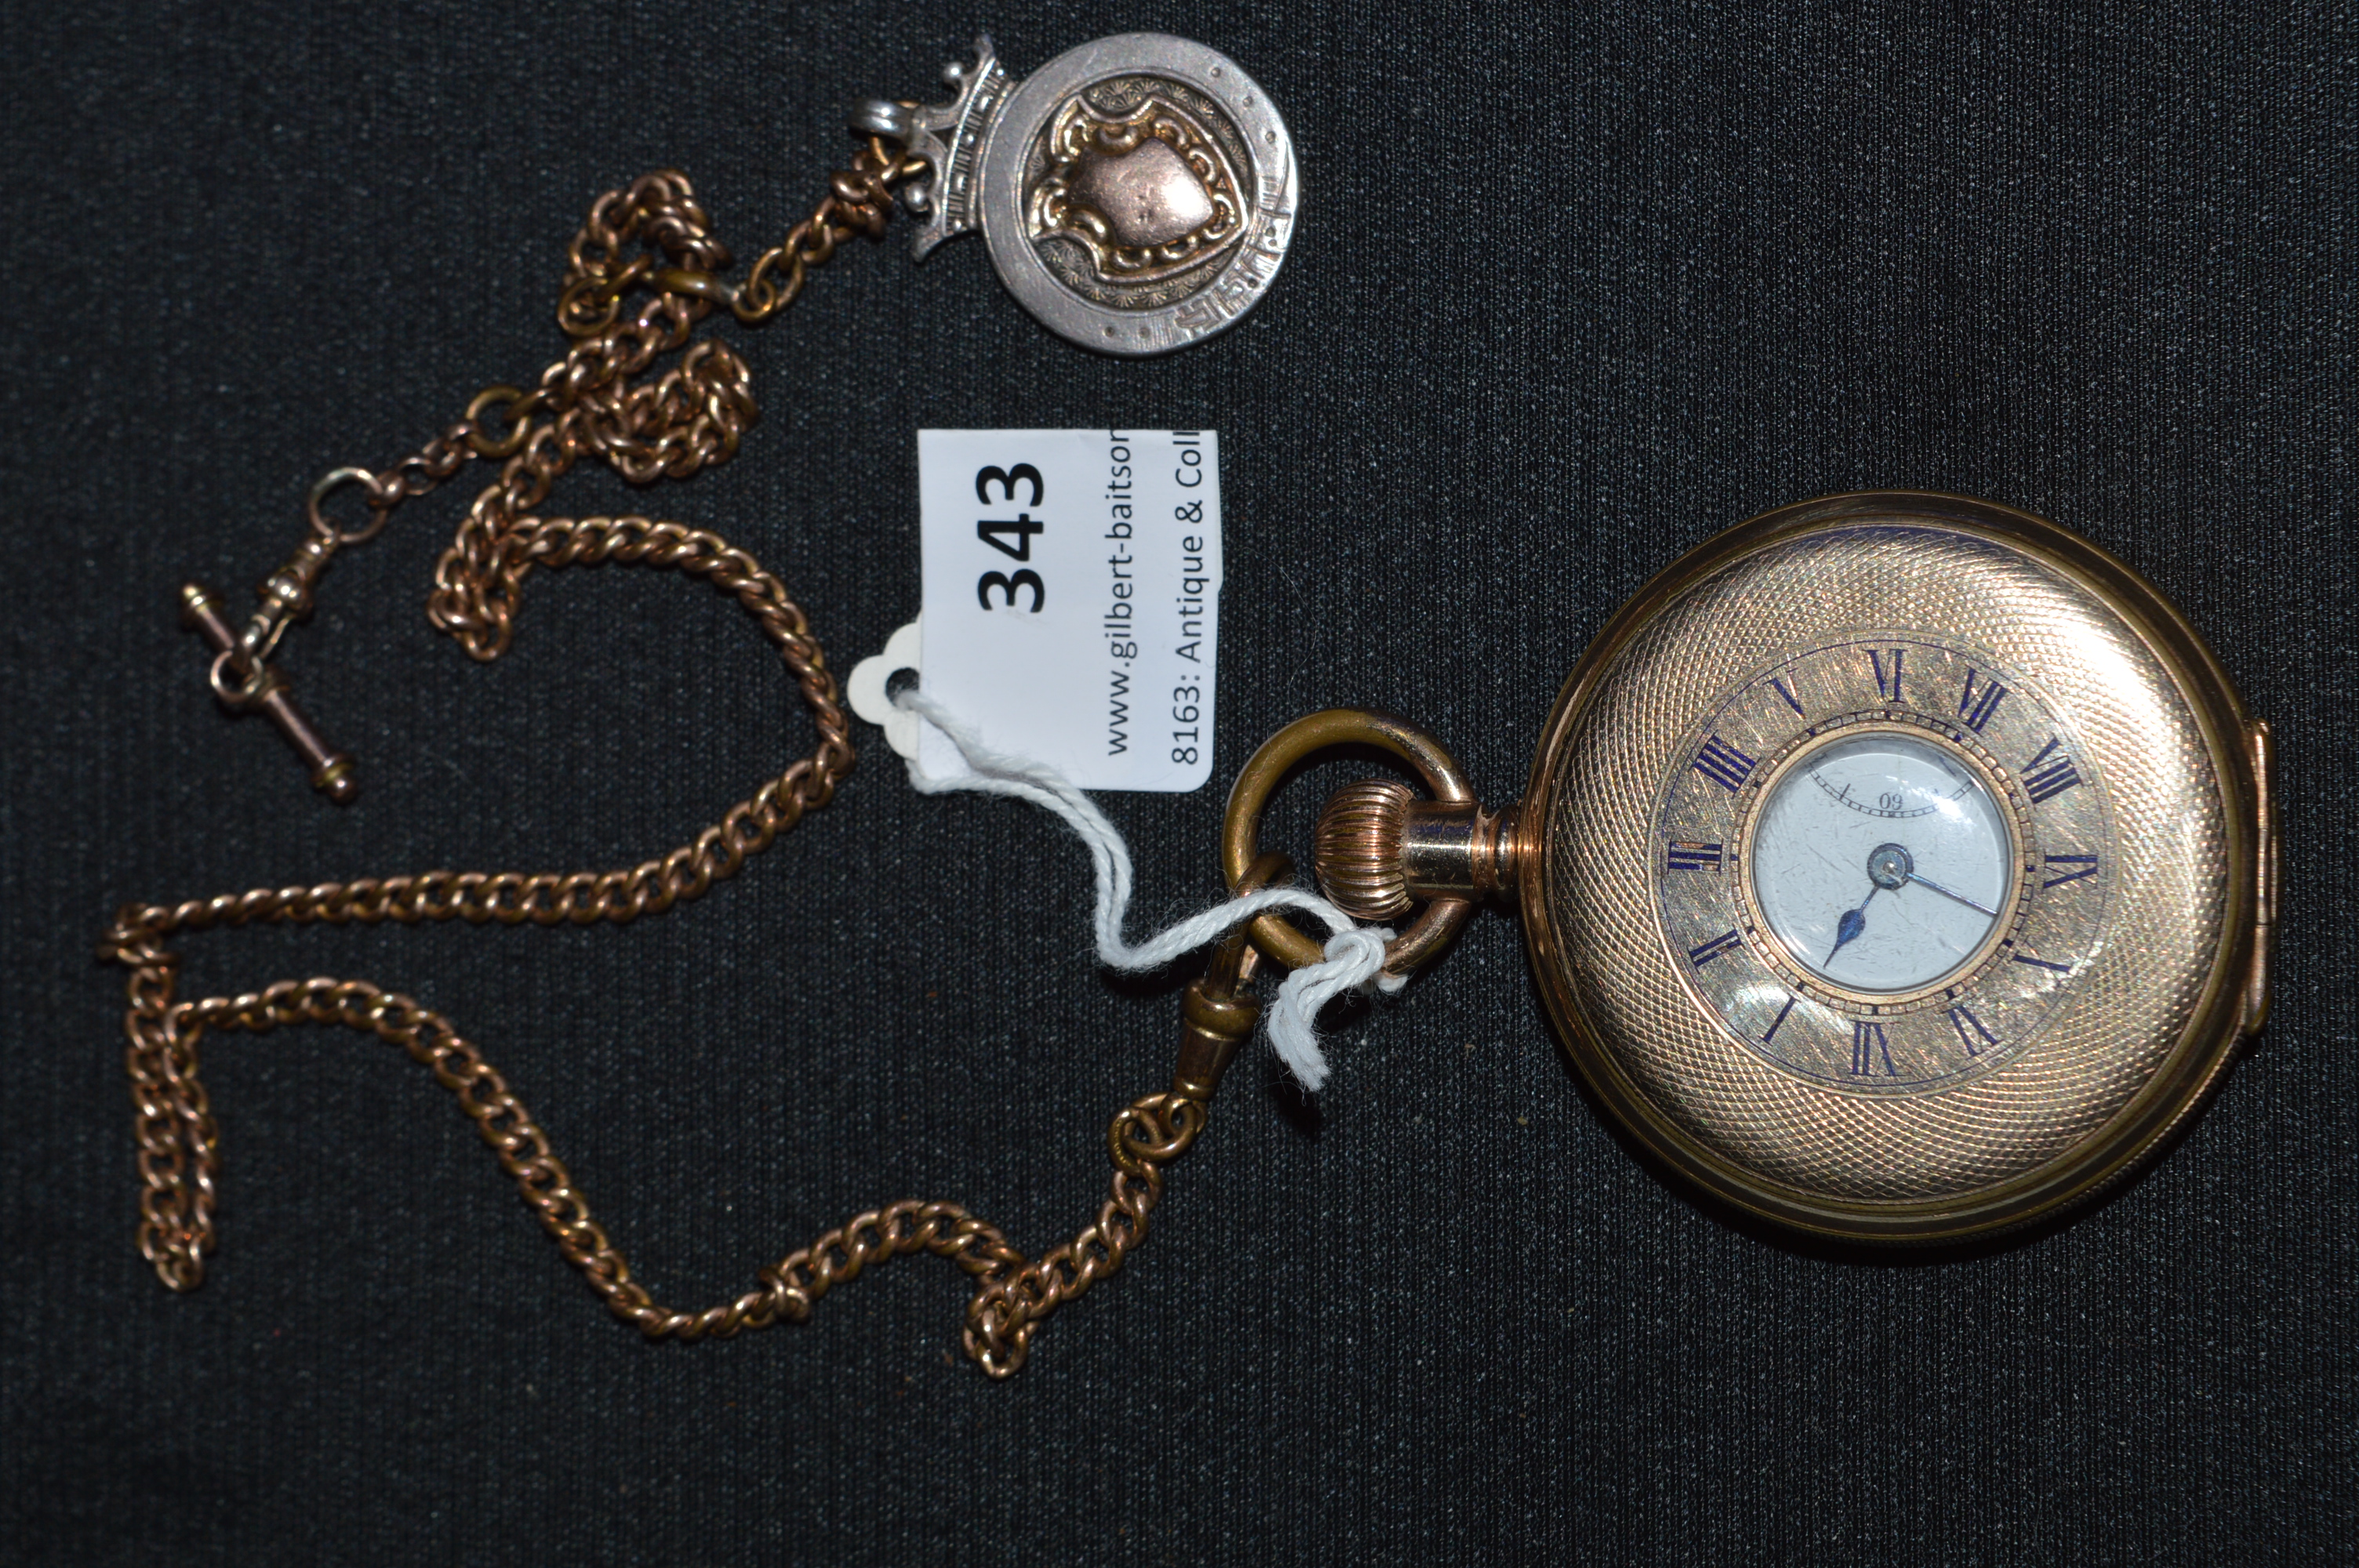 ALD English Gold Plated Pocket Watch plus Silver Fob